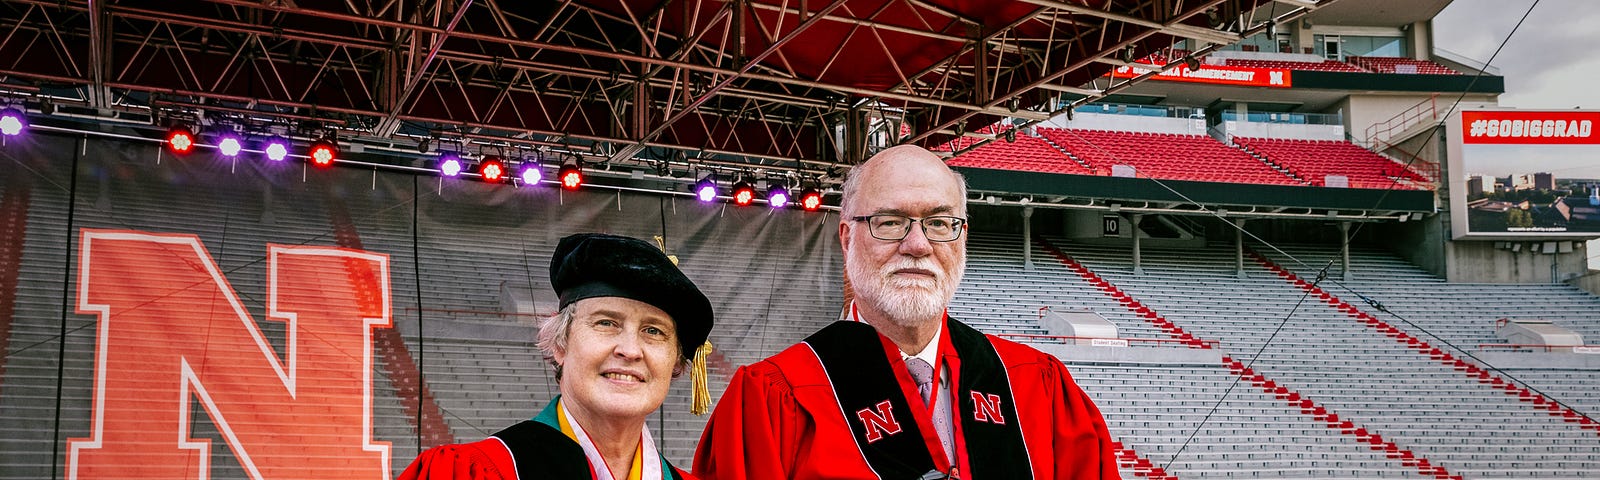 Vanessa and Bob take a photo on the stage inside the stadium ahead of undergraduate commencement